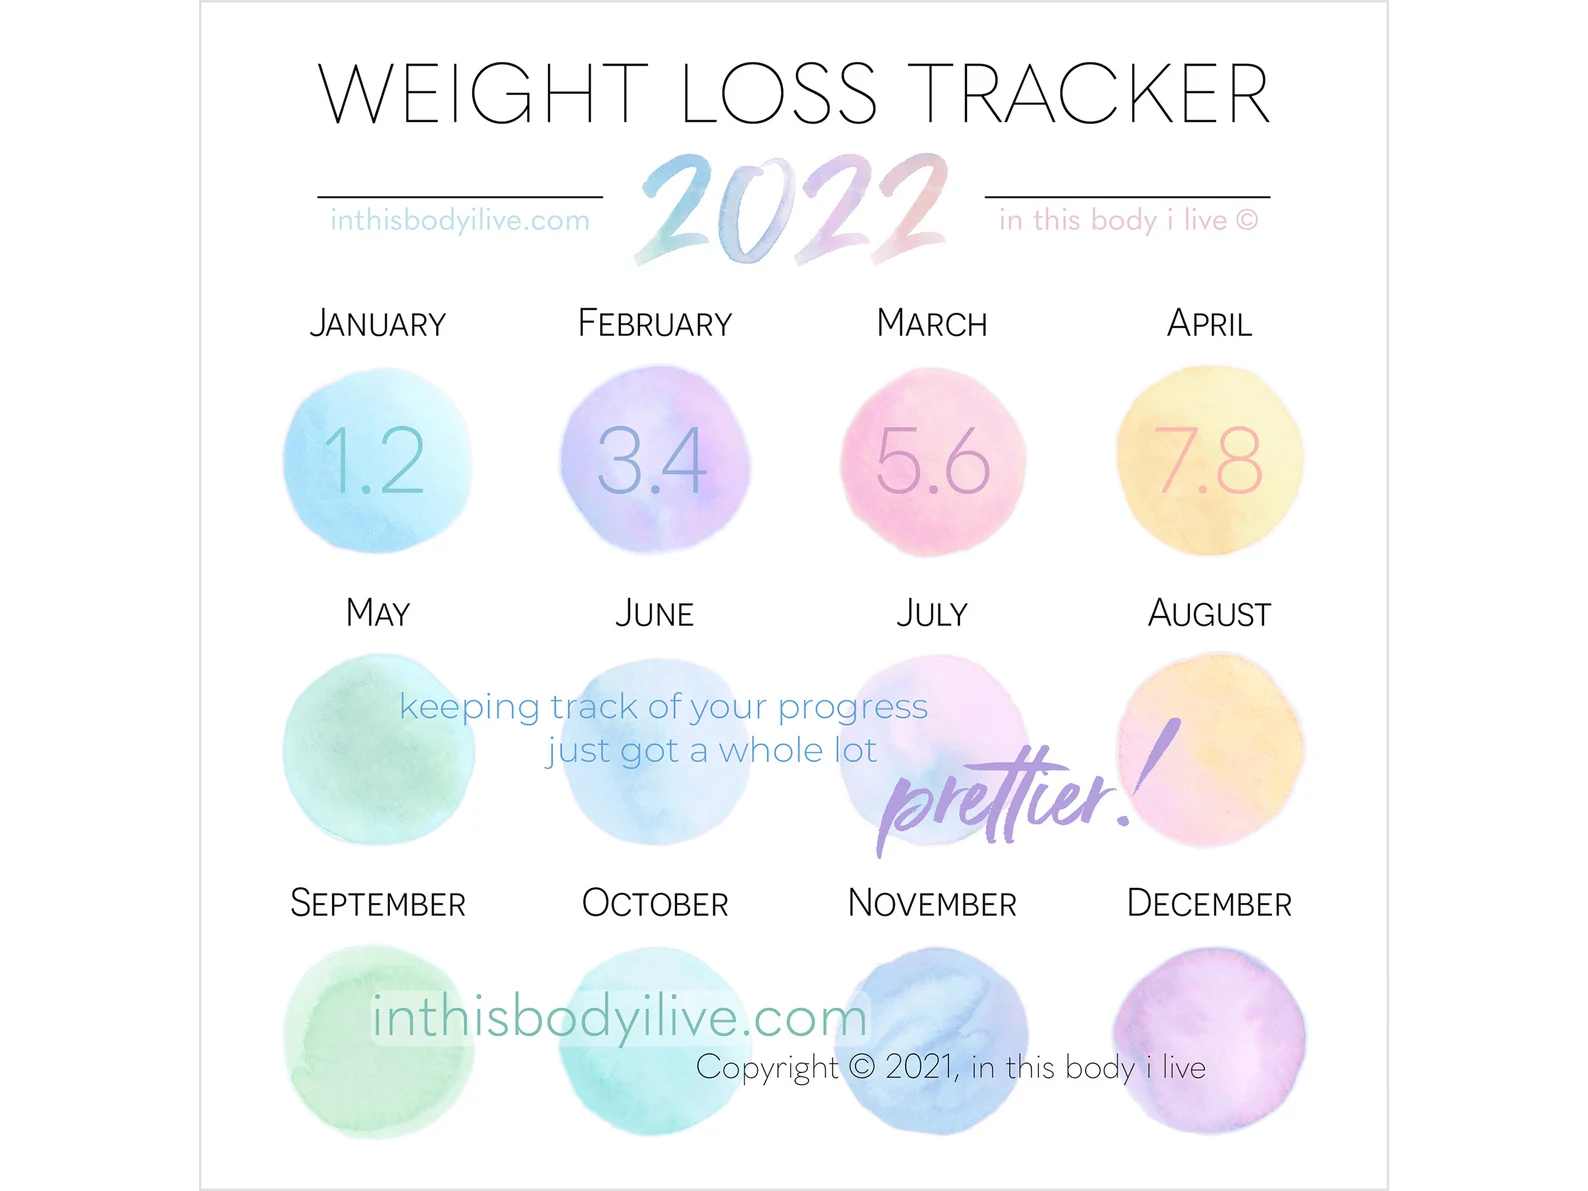 Weekly Weight Loss Tracker Instagram Template